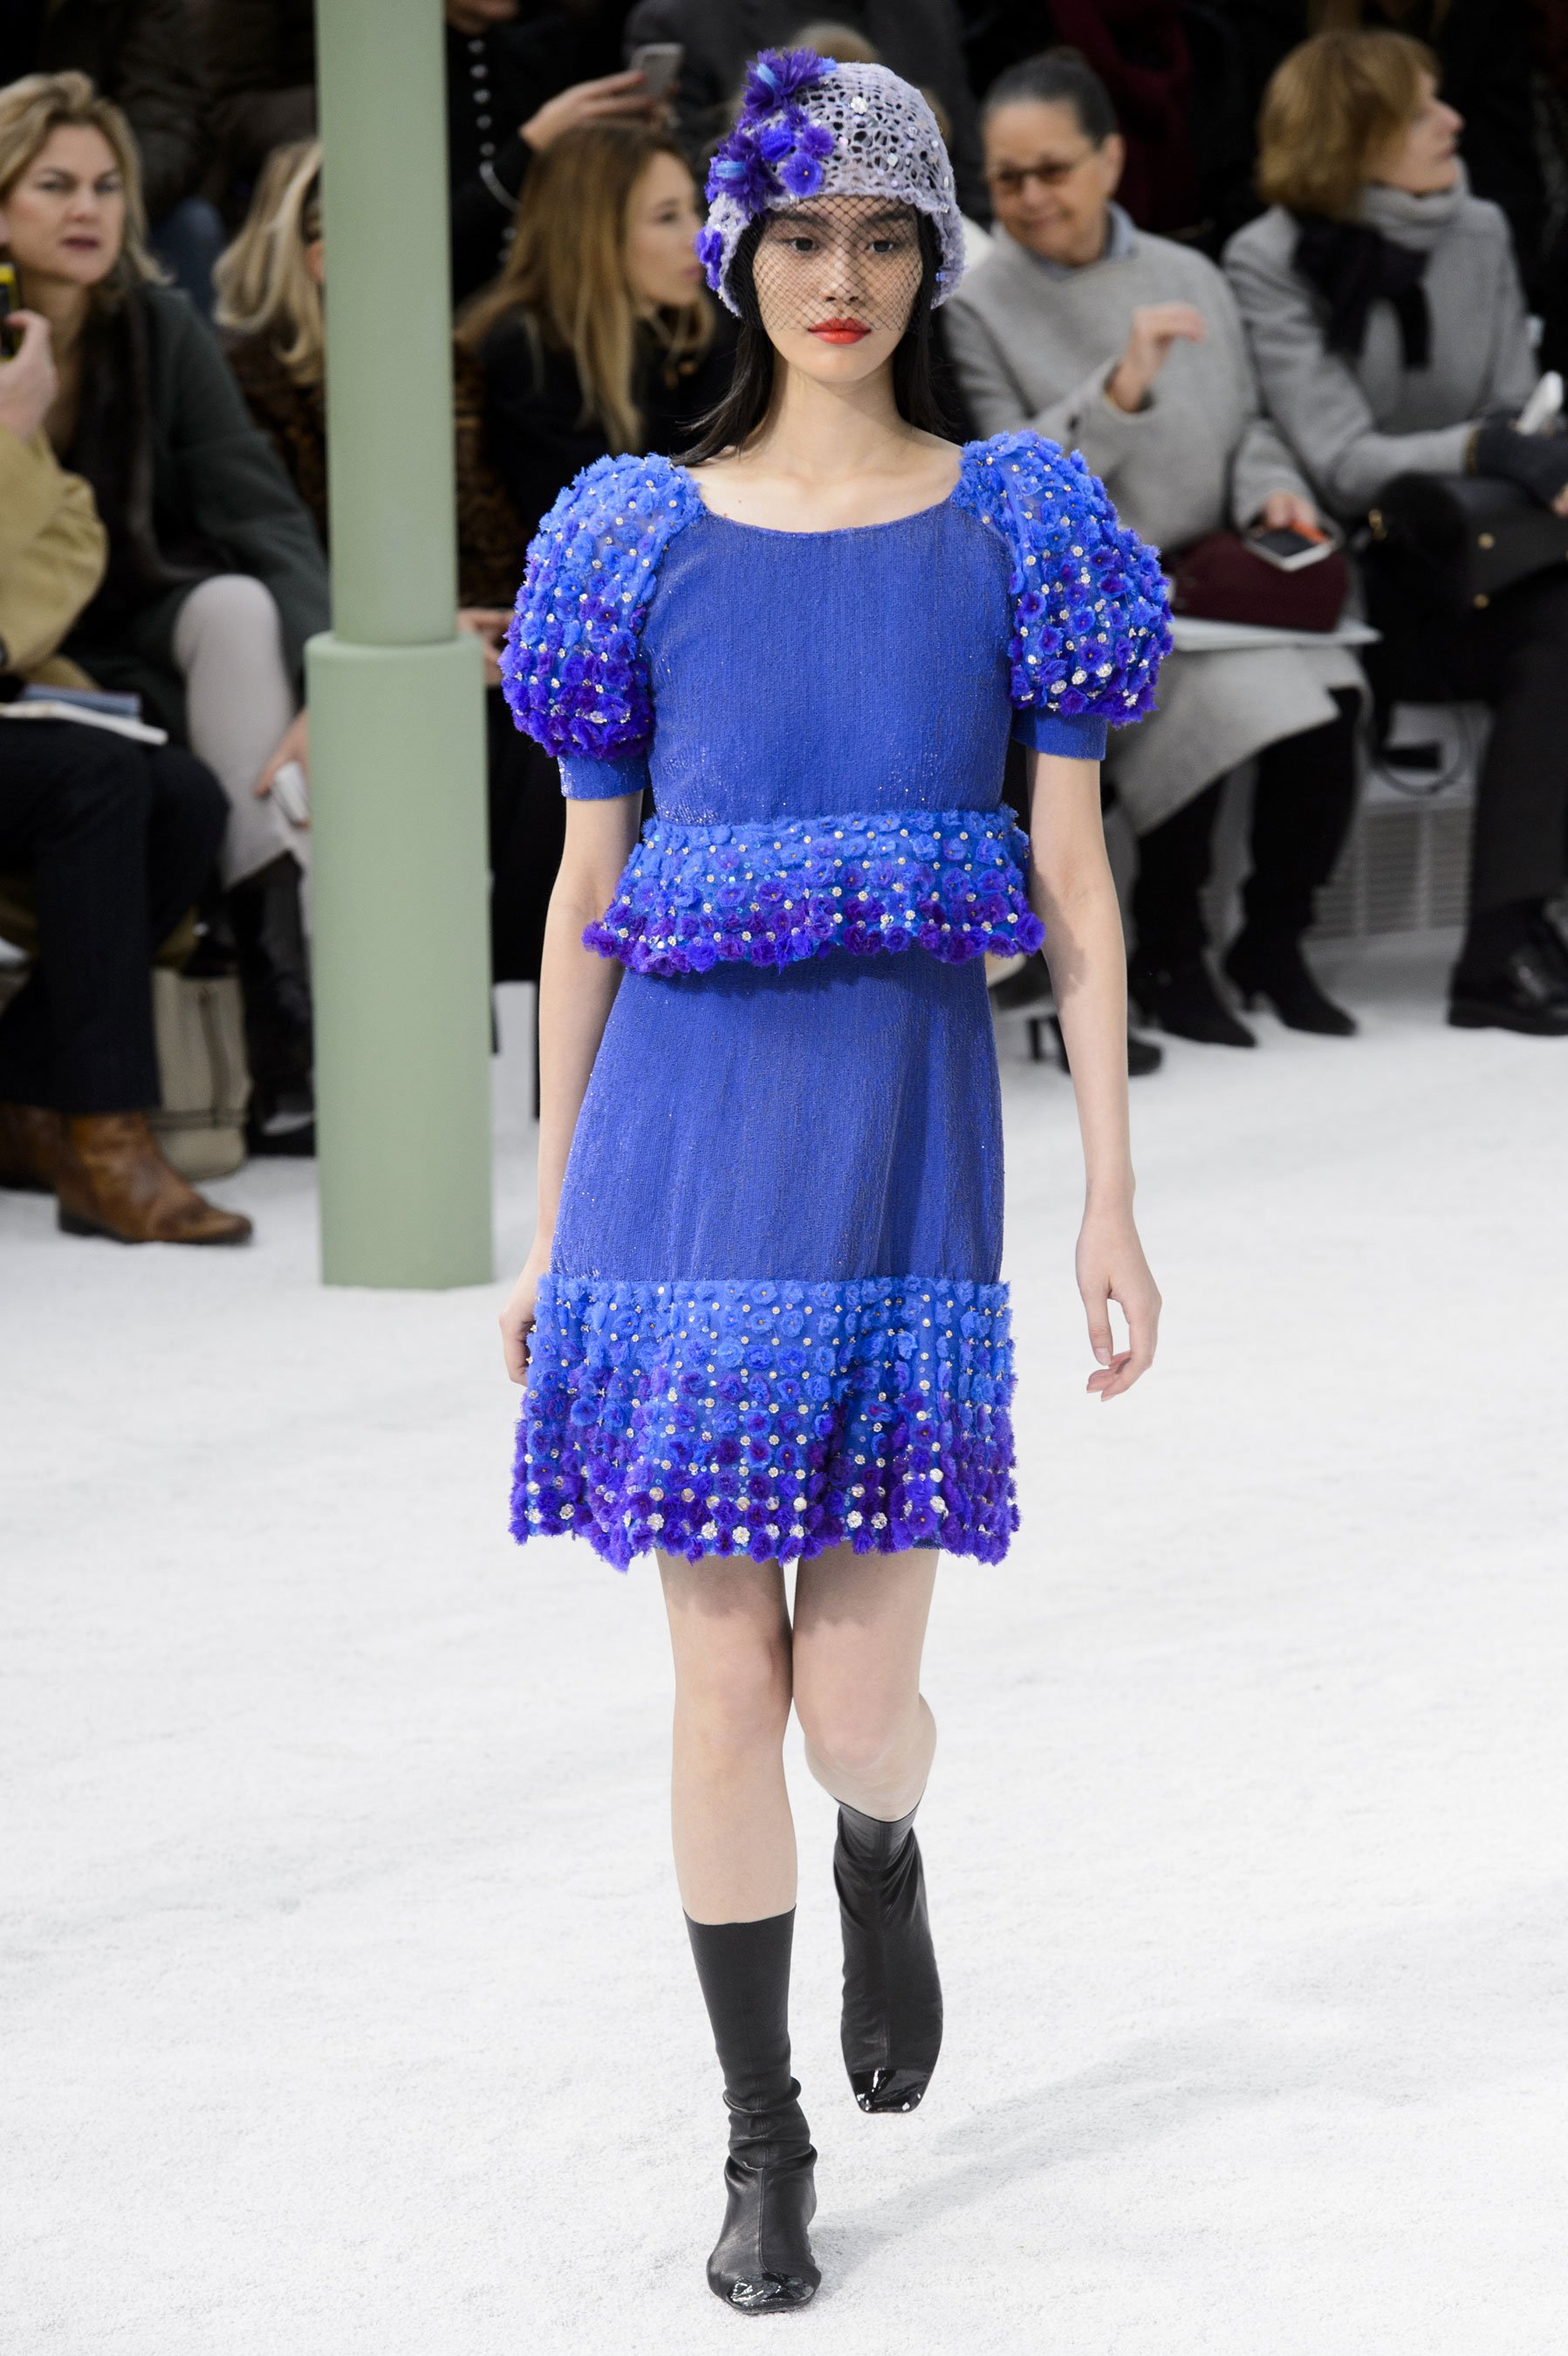 chanel haute couture spring 2015 pfw 42 ming